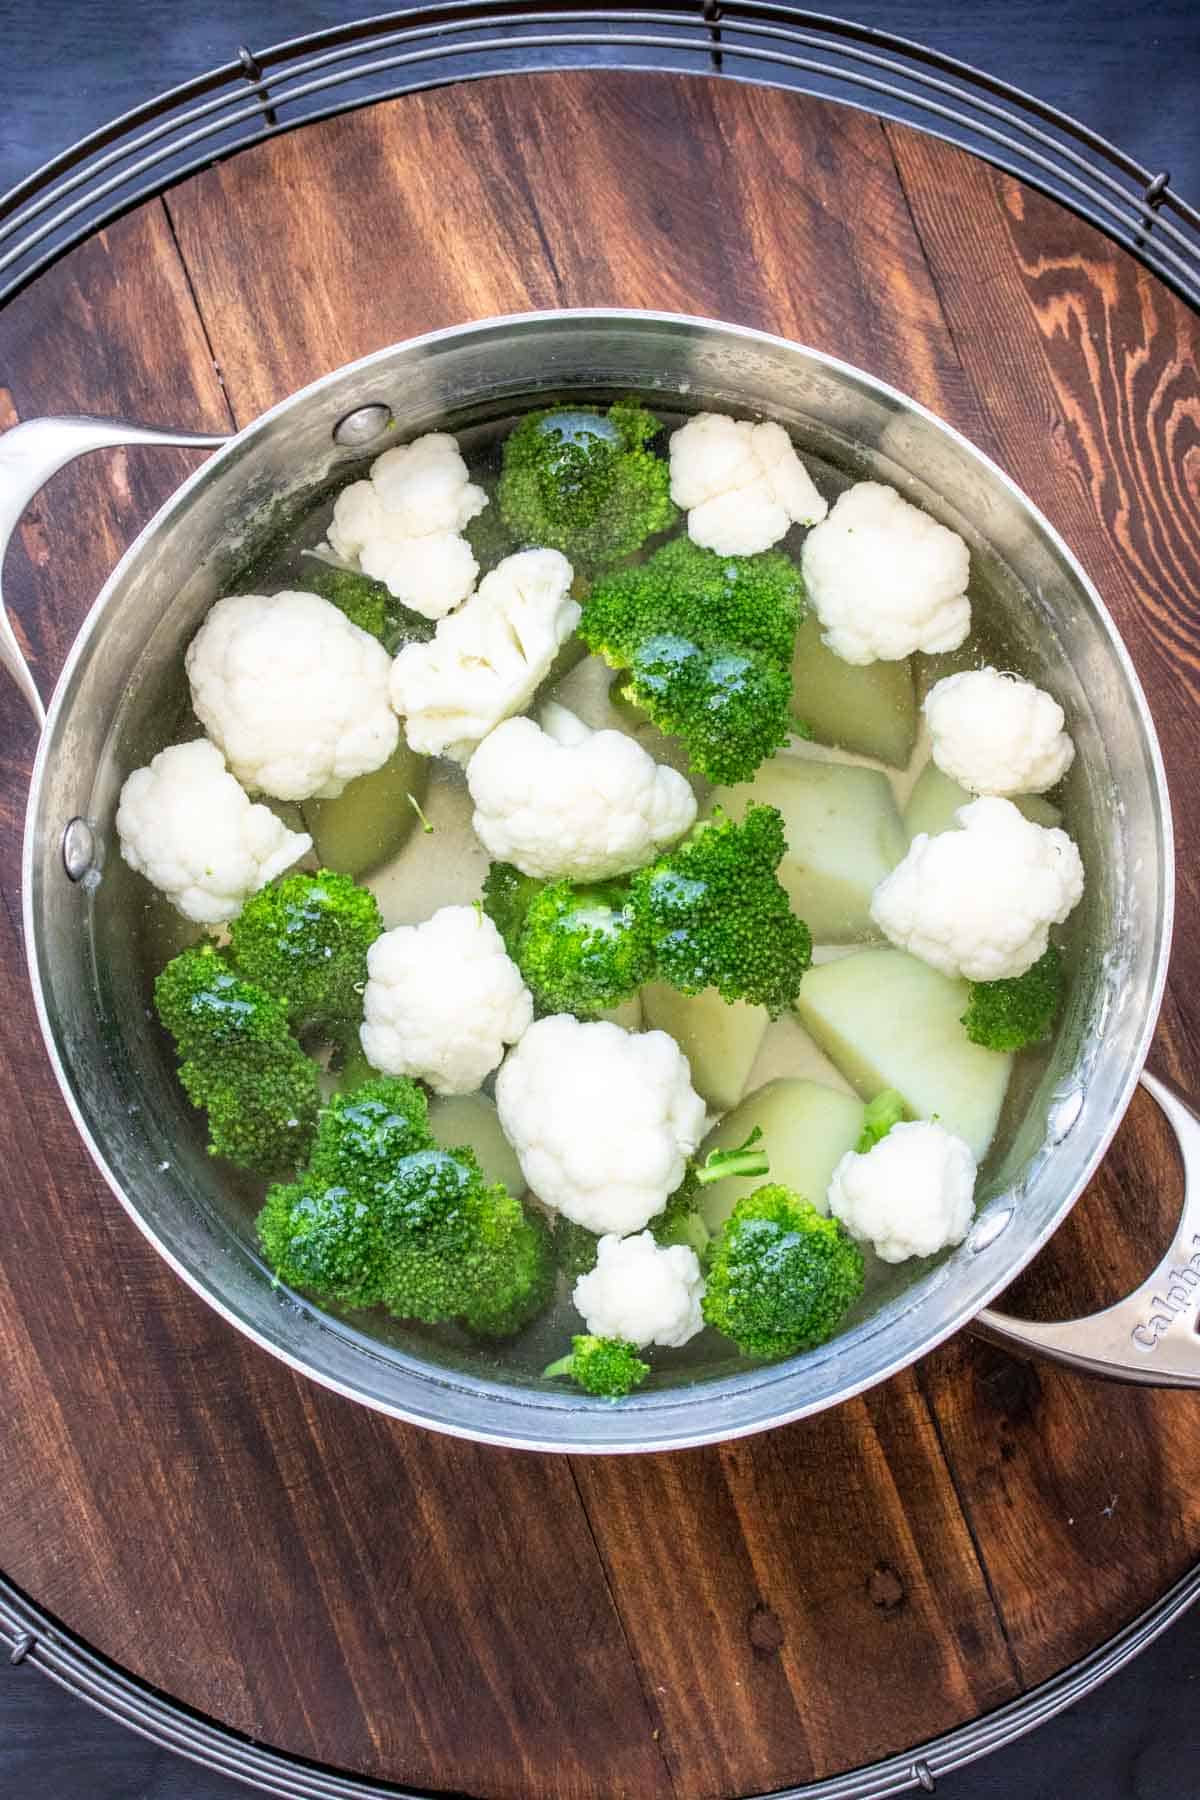 Cauliflower, broccoli and potato cooking in a pot.